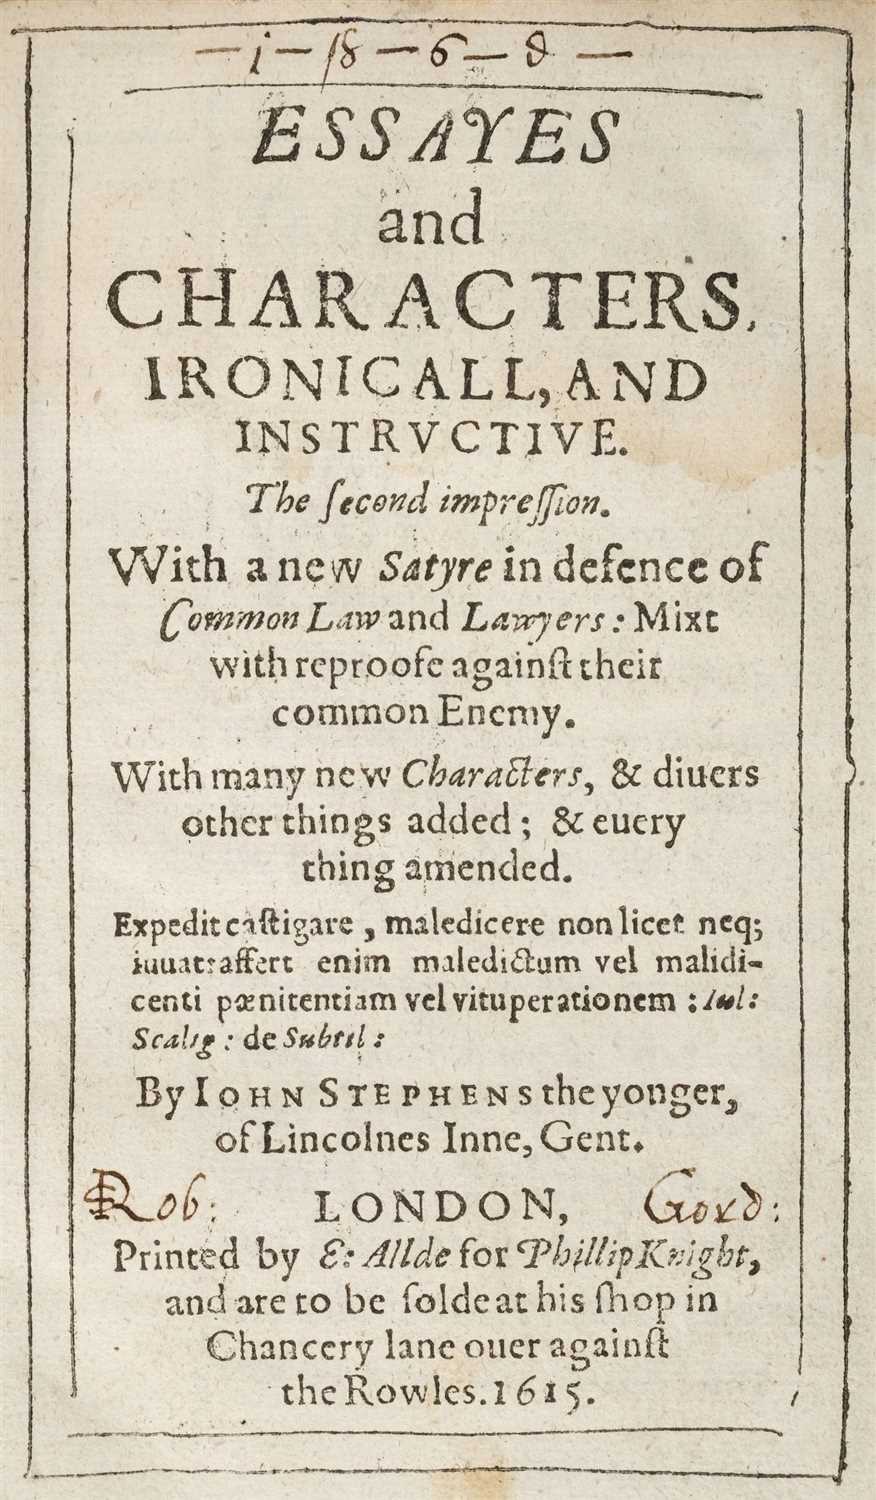 Lot 10 - Stephens (John). Essayes and Characters, Ironicall, and Instructive, 1615